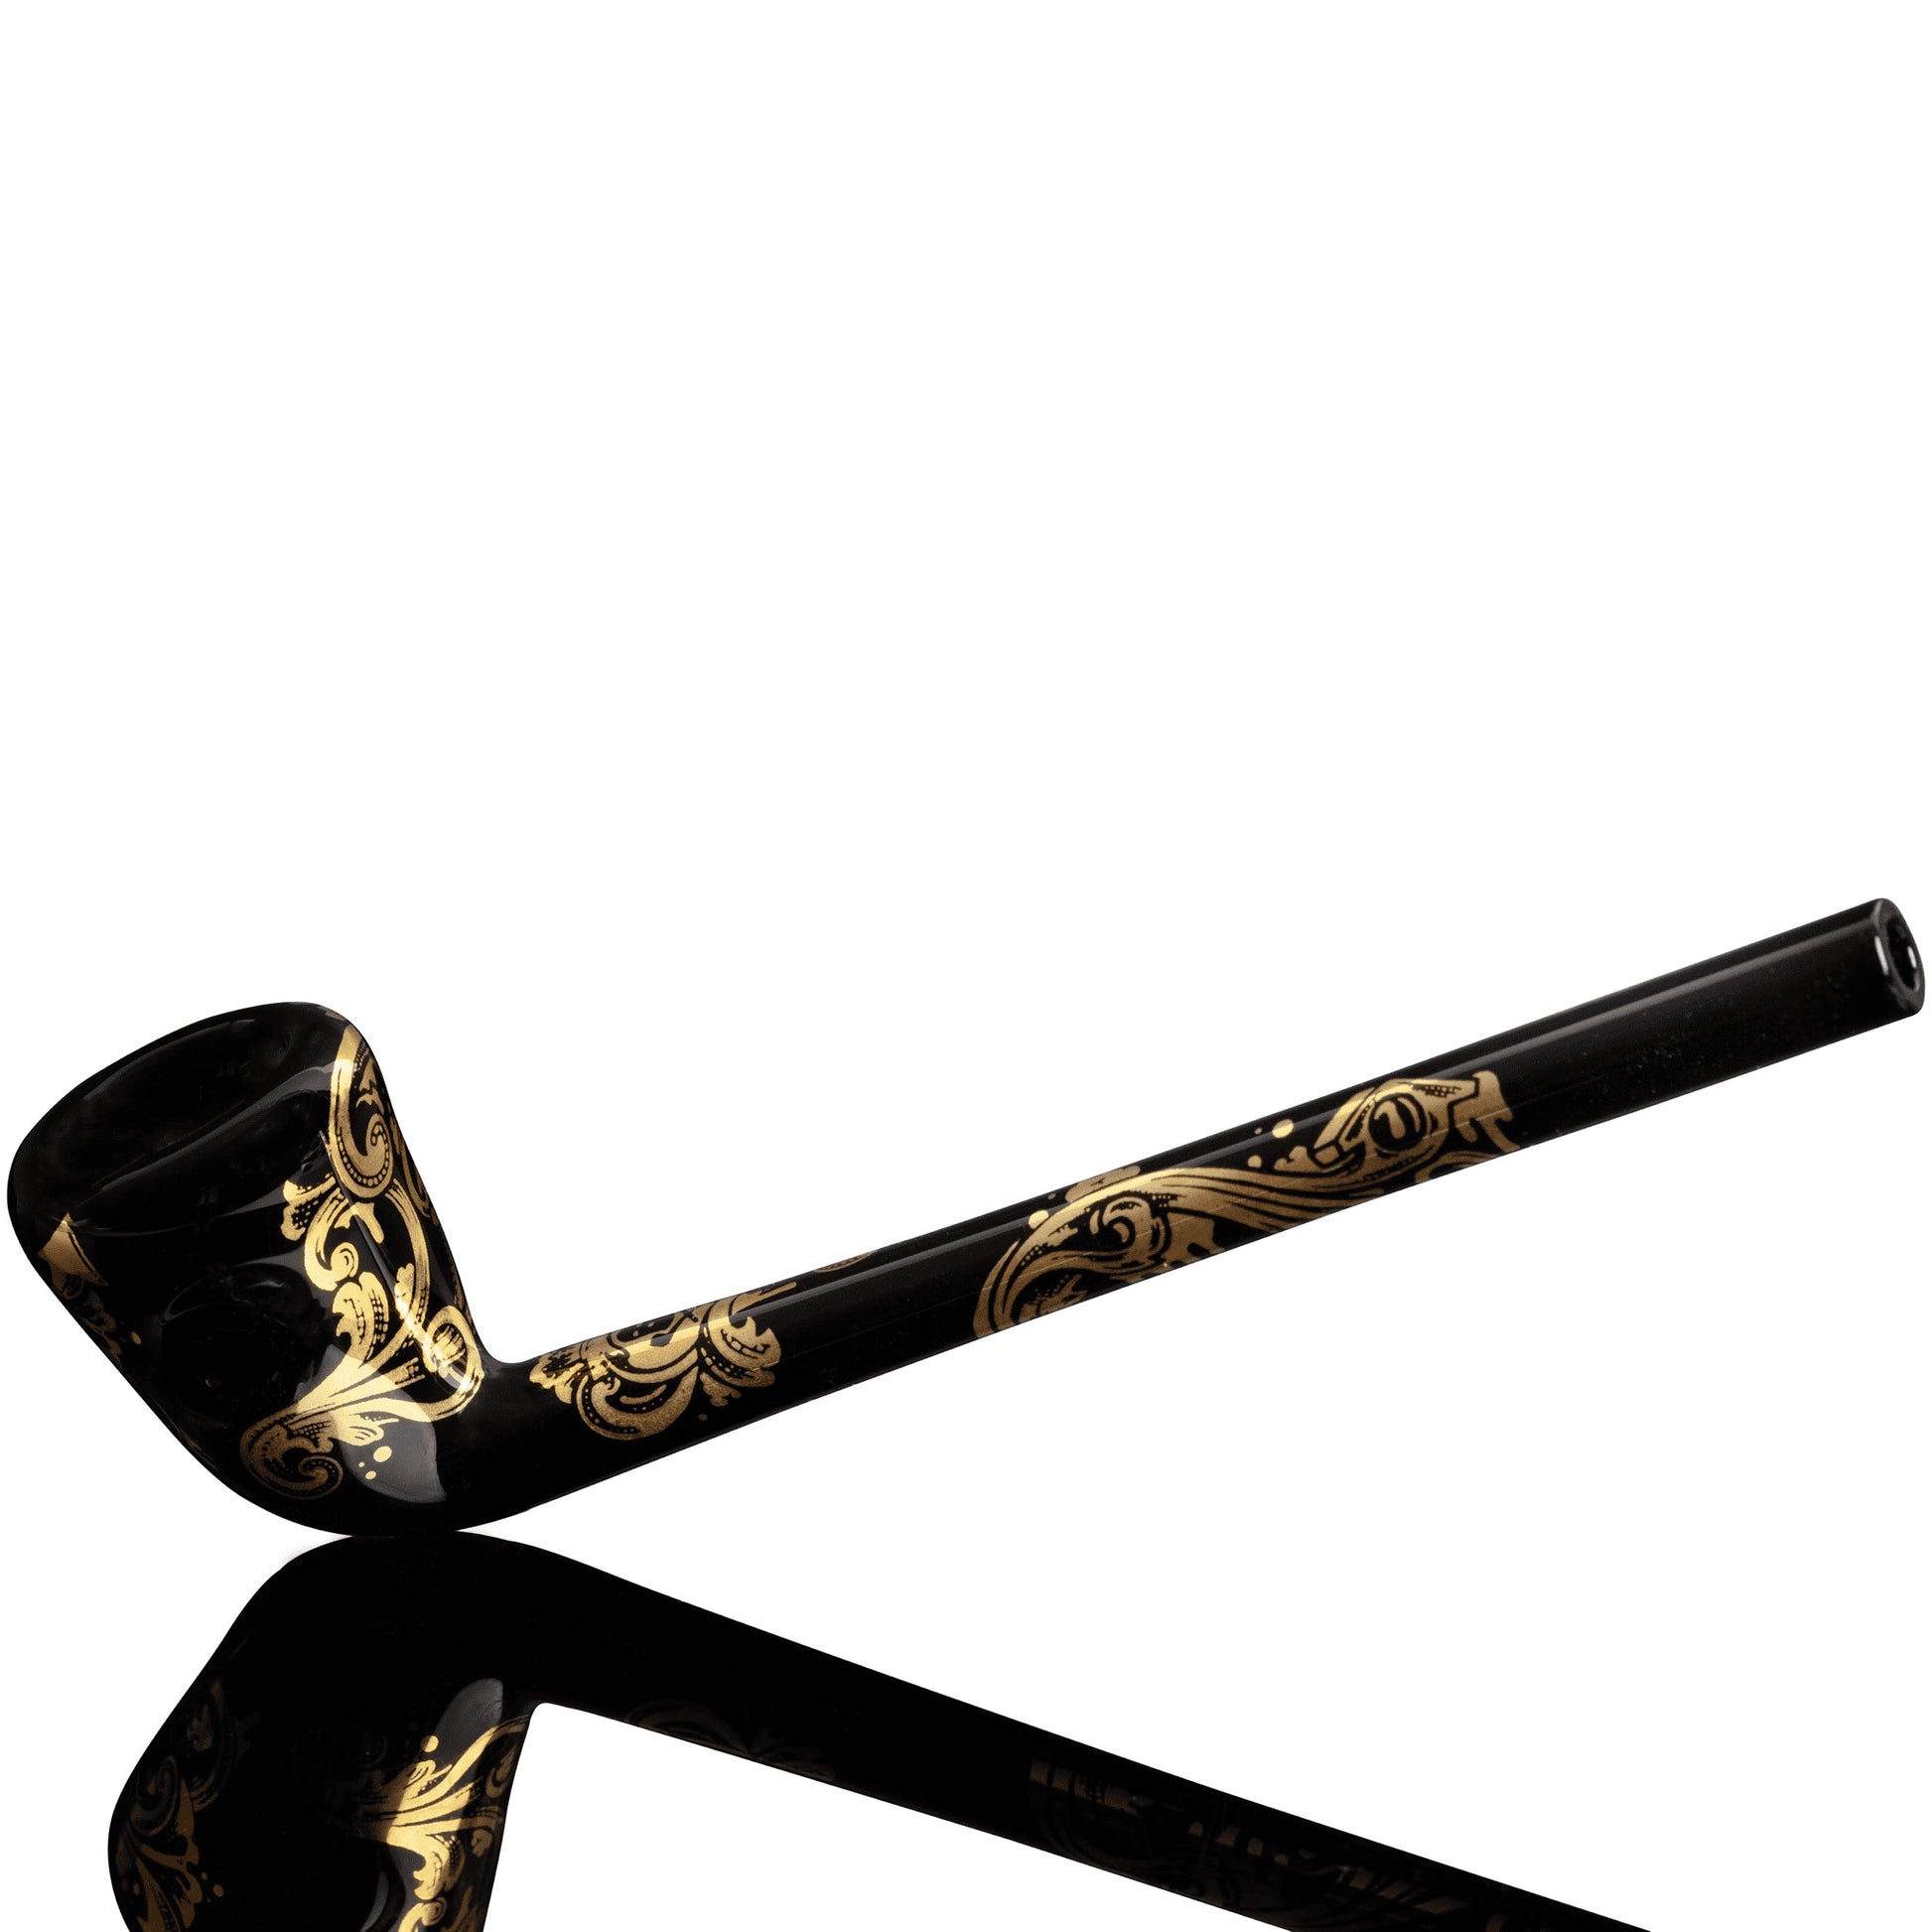 sophisticated design of the Pipe & Ash Tray Set by Ski Mask Glass (GV 2022)